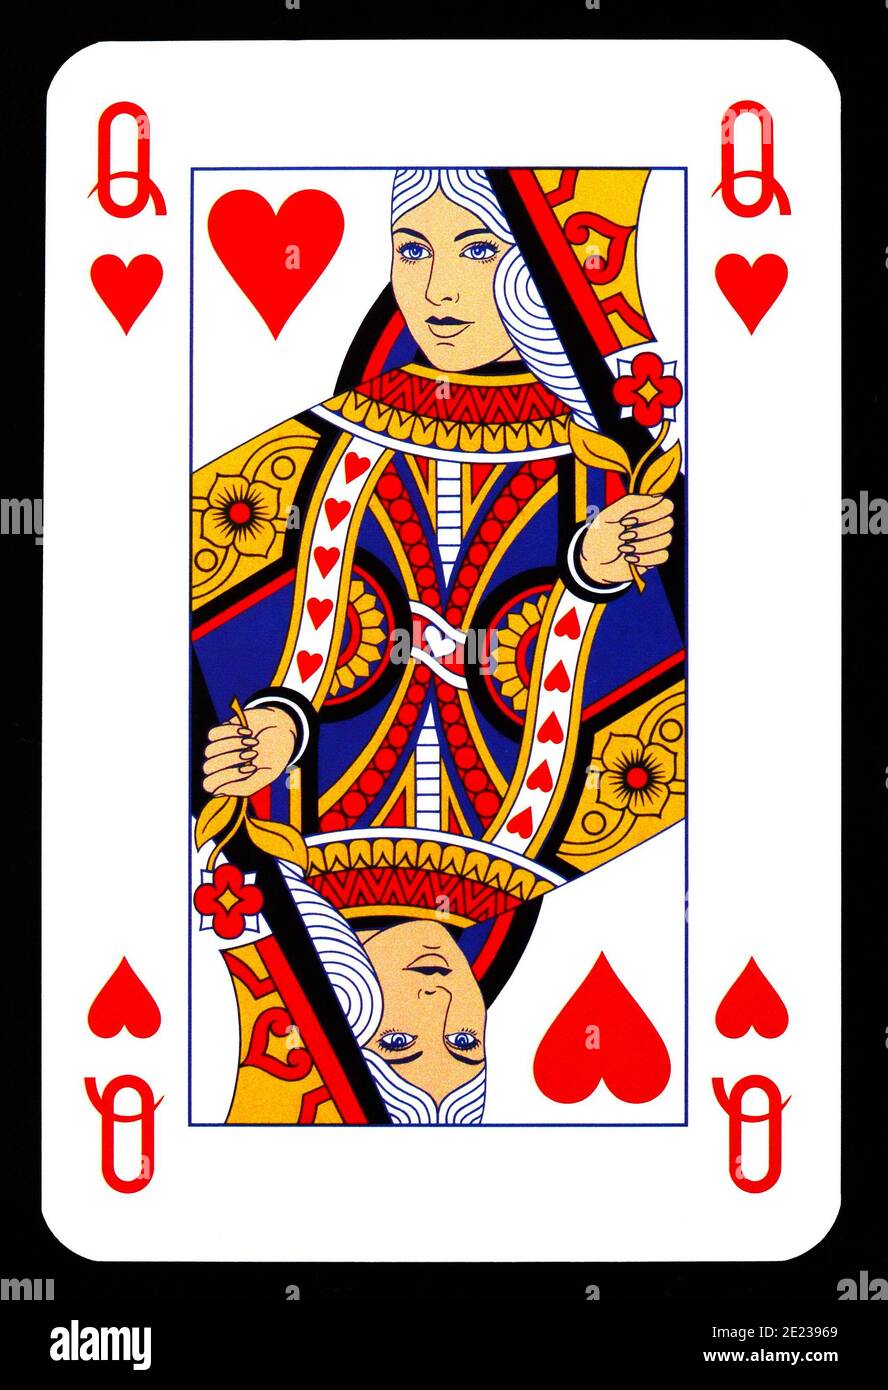 Queen of hearts playing card isolated on black Stock Photo - Alamy